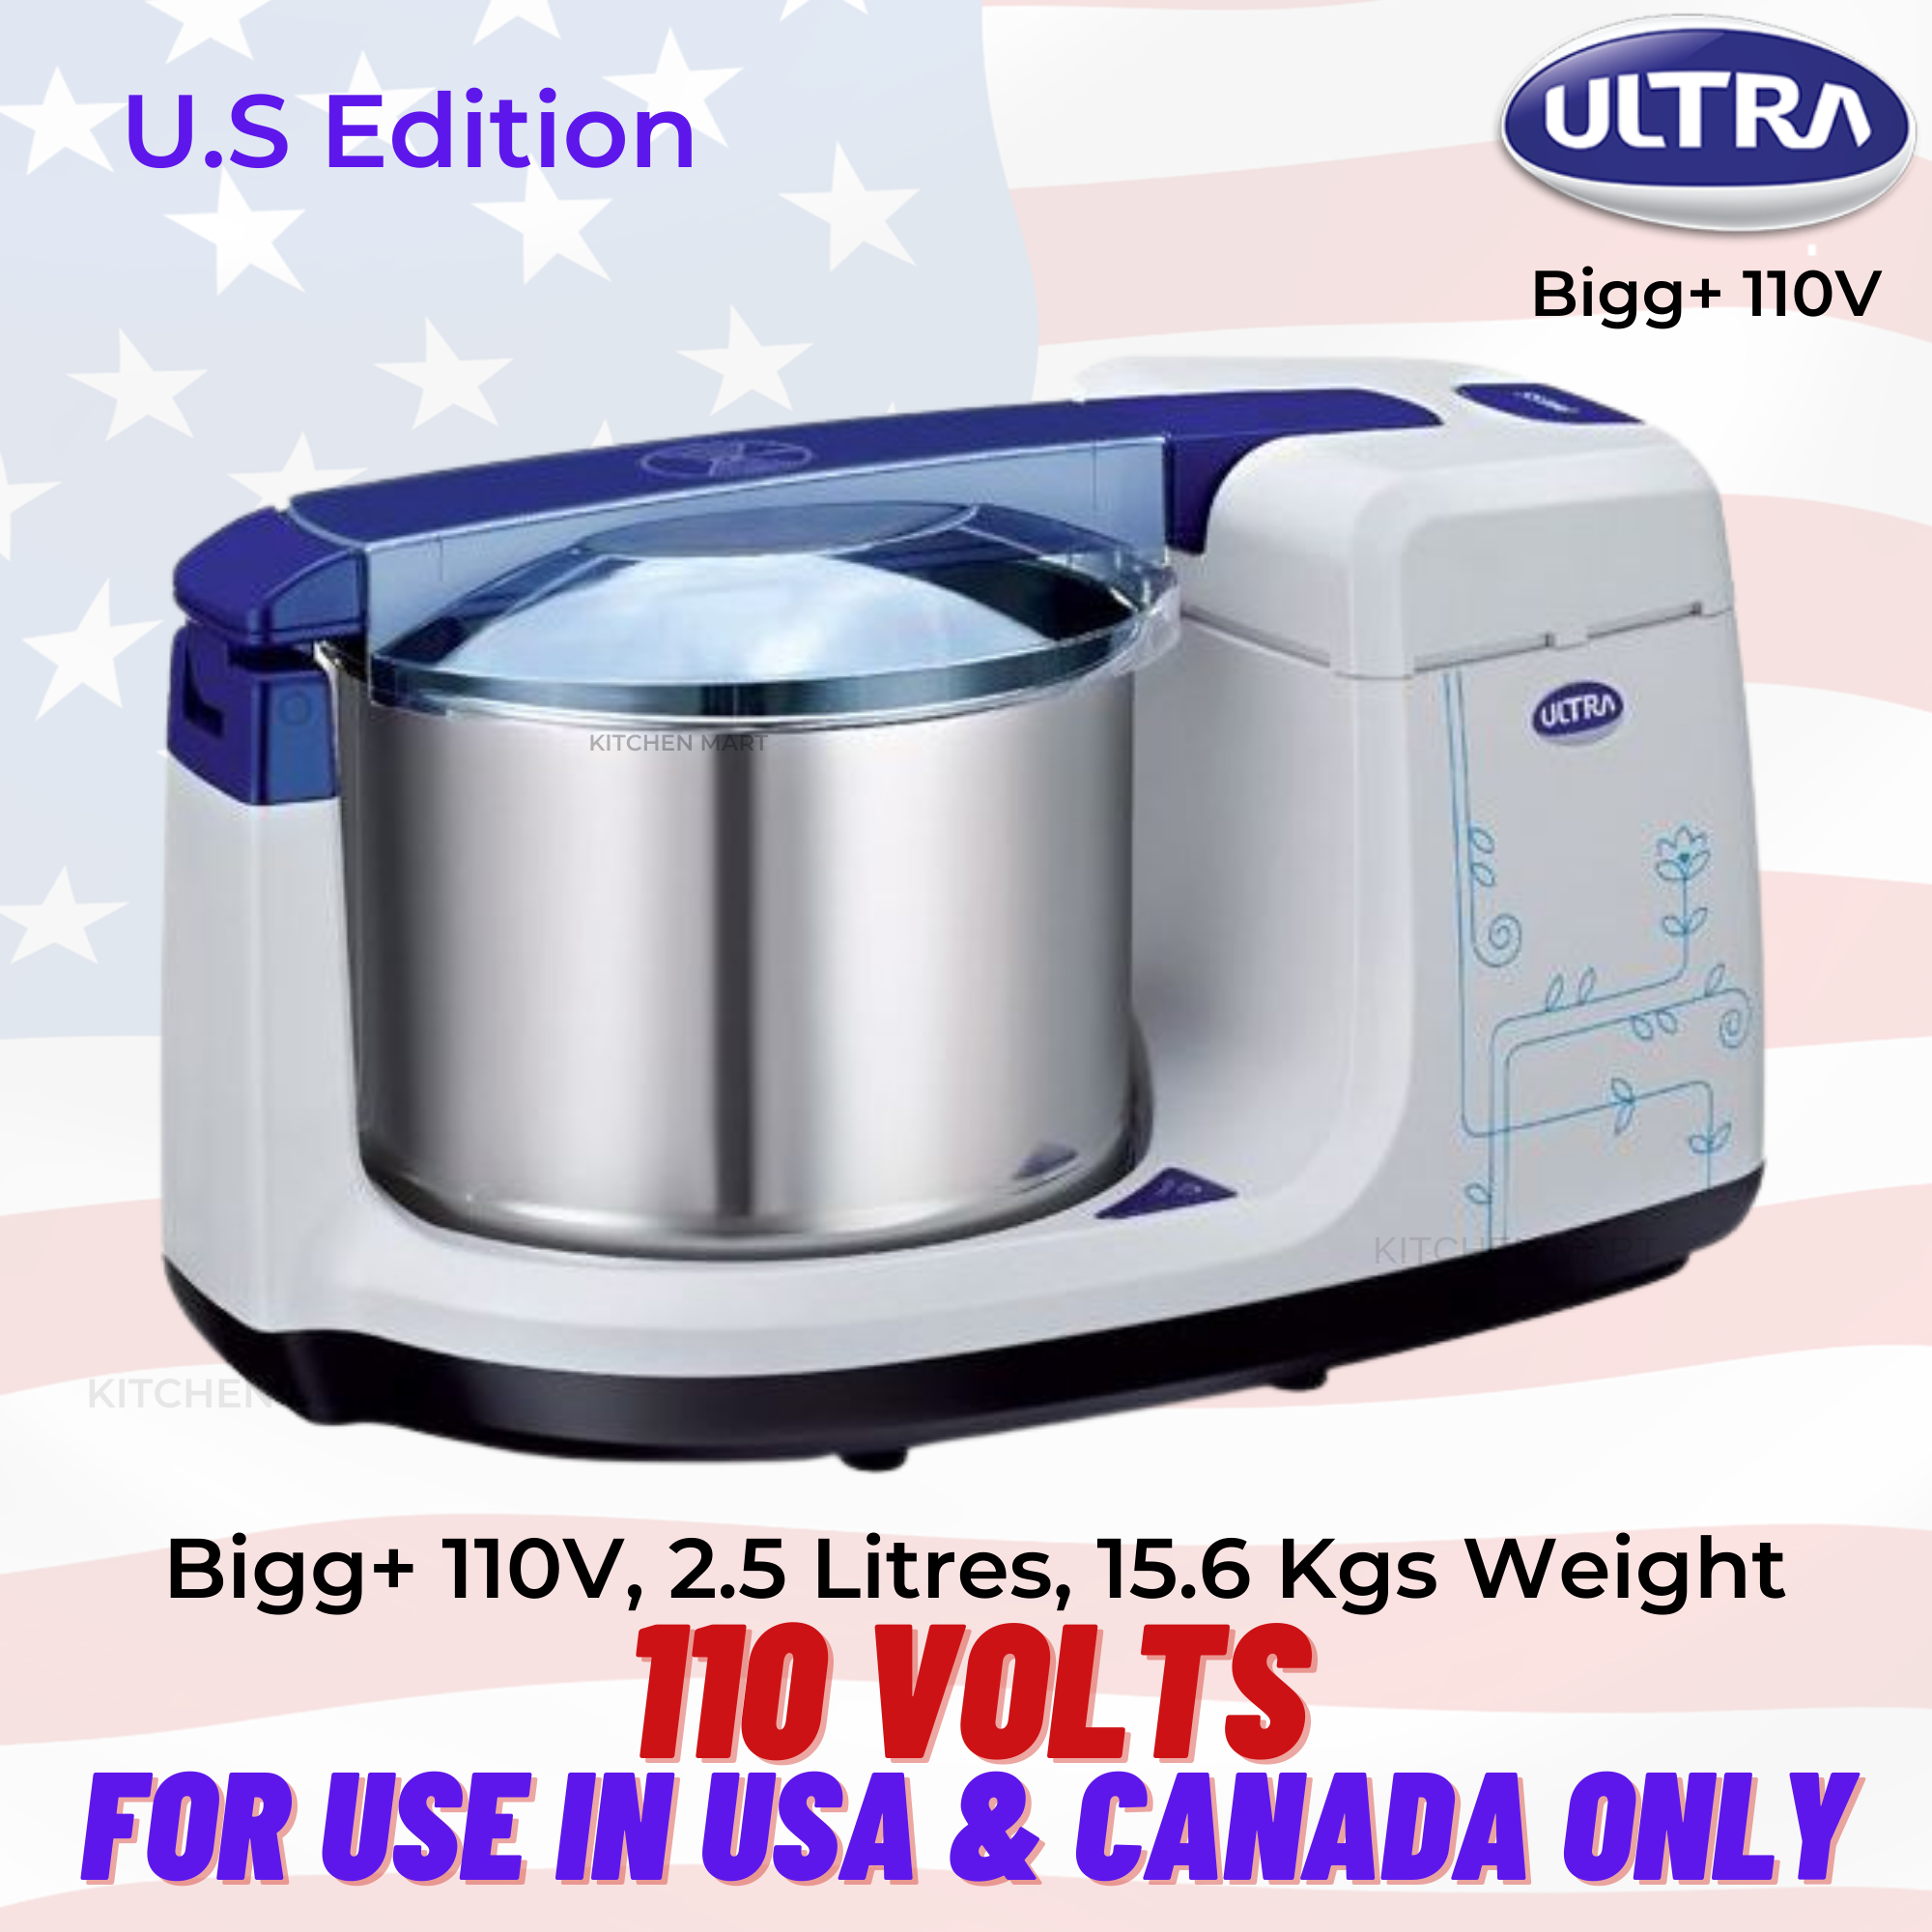 Elgi Ultra Bigg+ Table Top Wet Grinder 2.5 Litres, 110volts for use in USA & Canada